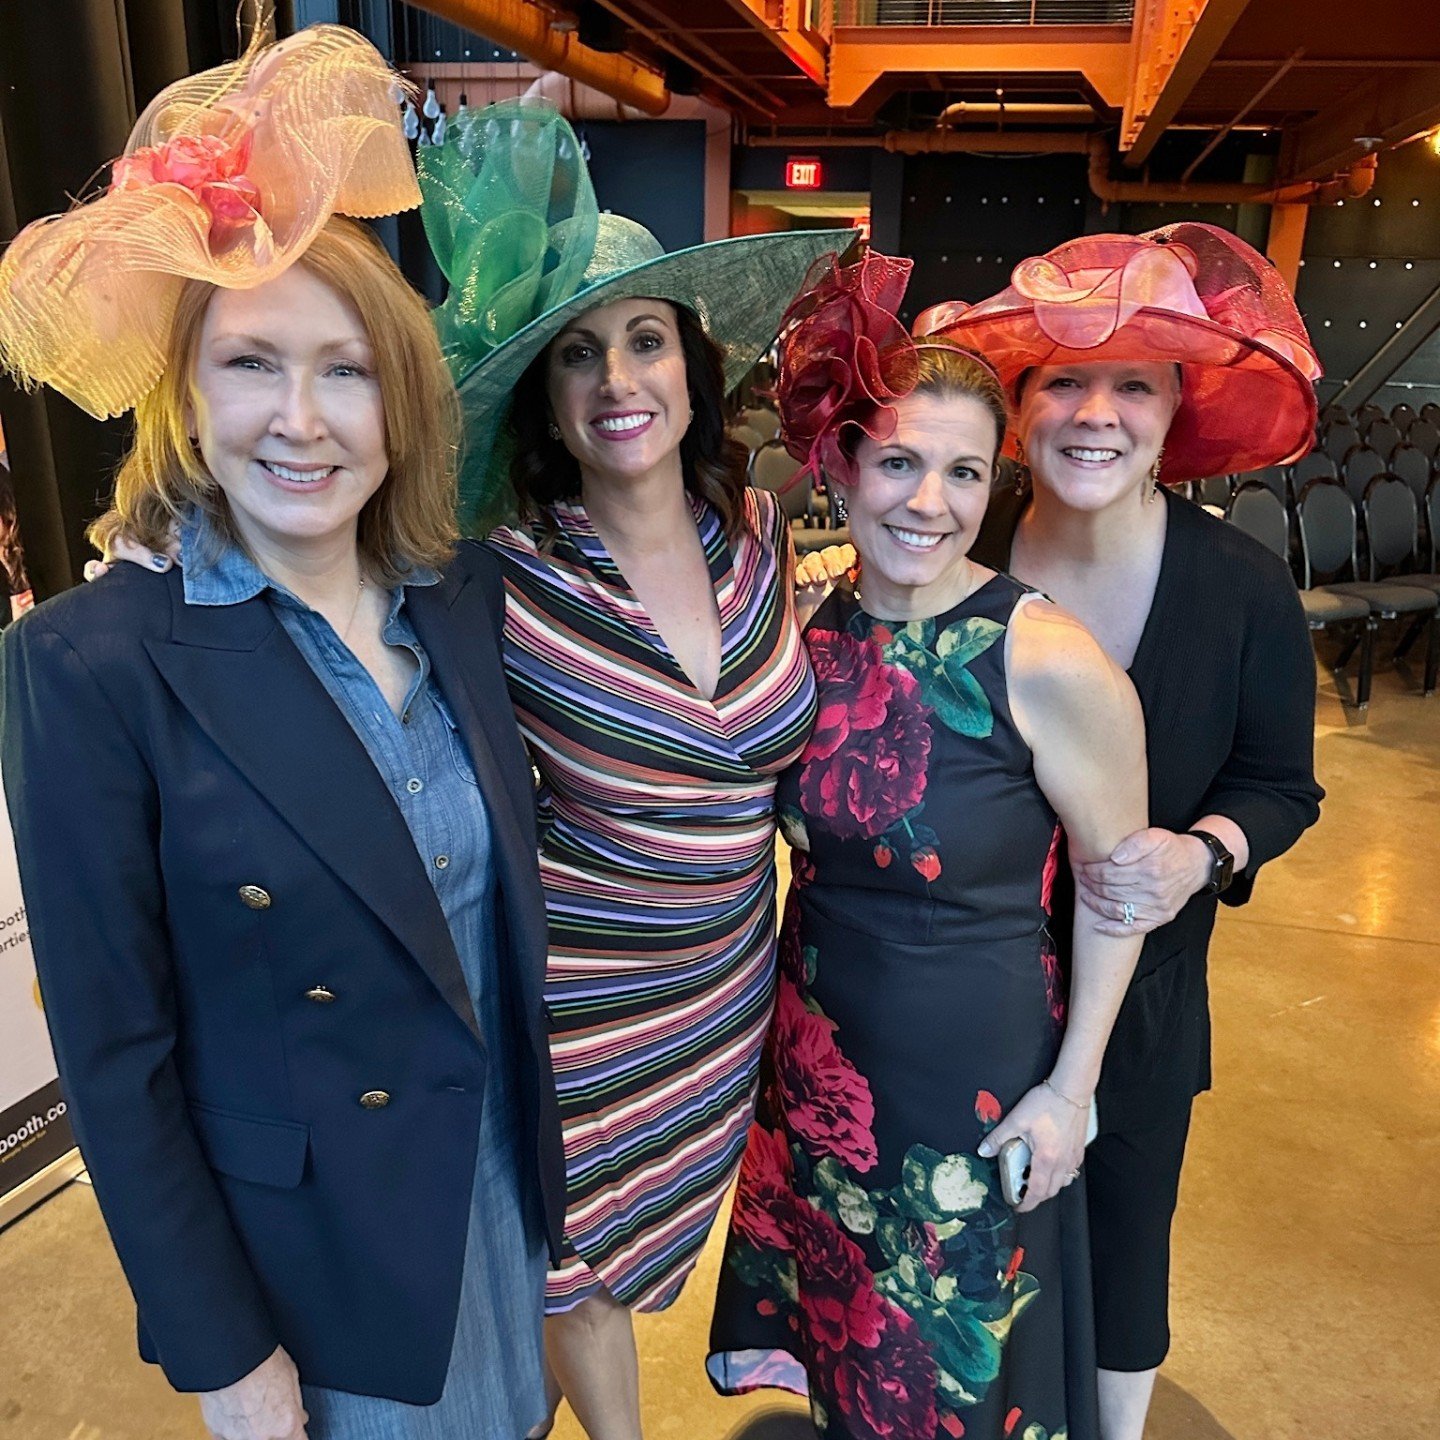 It was off to the races for Tina as she attended the Get Down and Derby fundraising event last week at @ArtsQuest_pa. 

The event was organized by @elainezelker - in support of the @llsusa and a close friend of #SocialT's, Kristine Ortiz of @kloevent